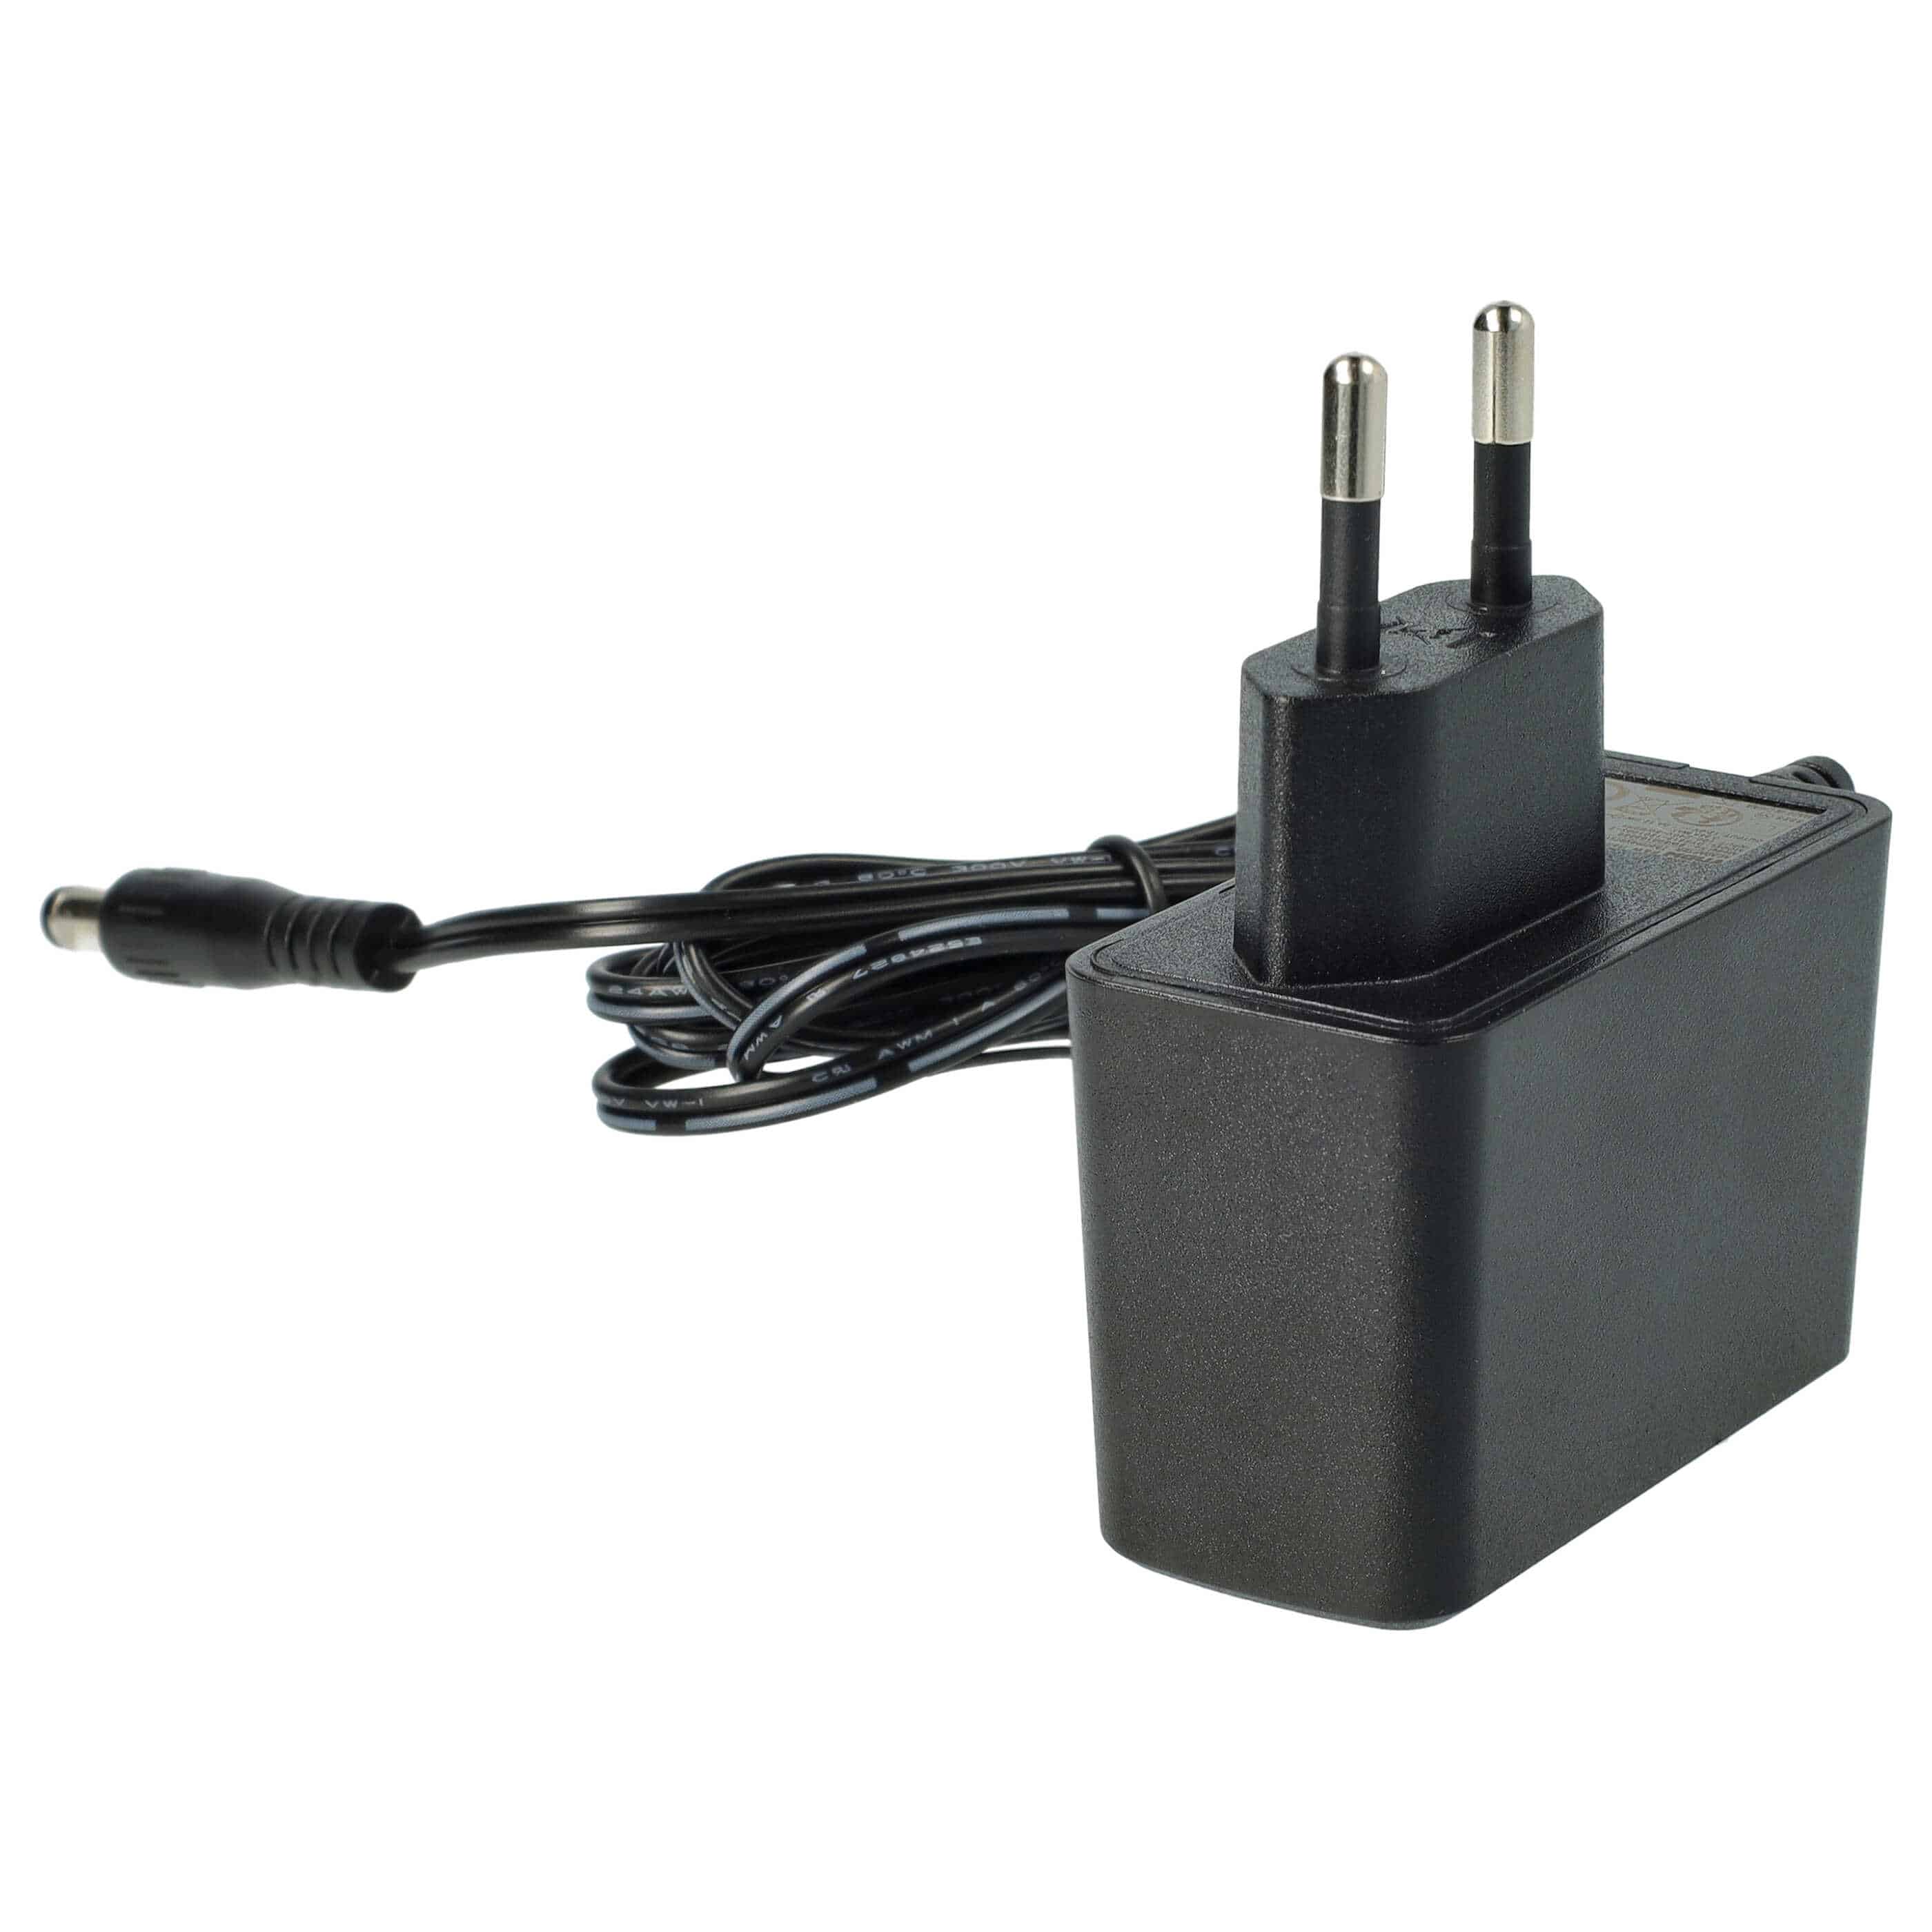 Mains Power Adapter replaces Compex 683000 for Compex Muscle Stimulator, Electro-Stimulator - 120 cm